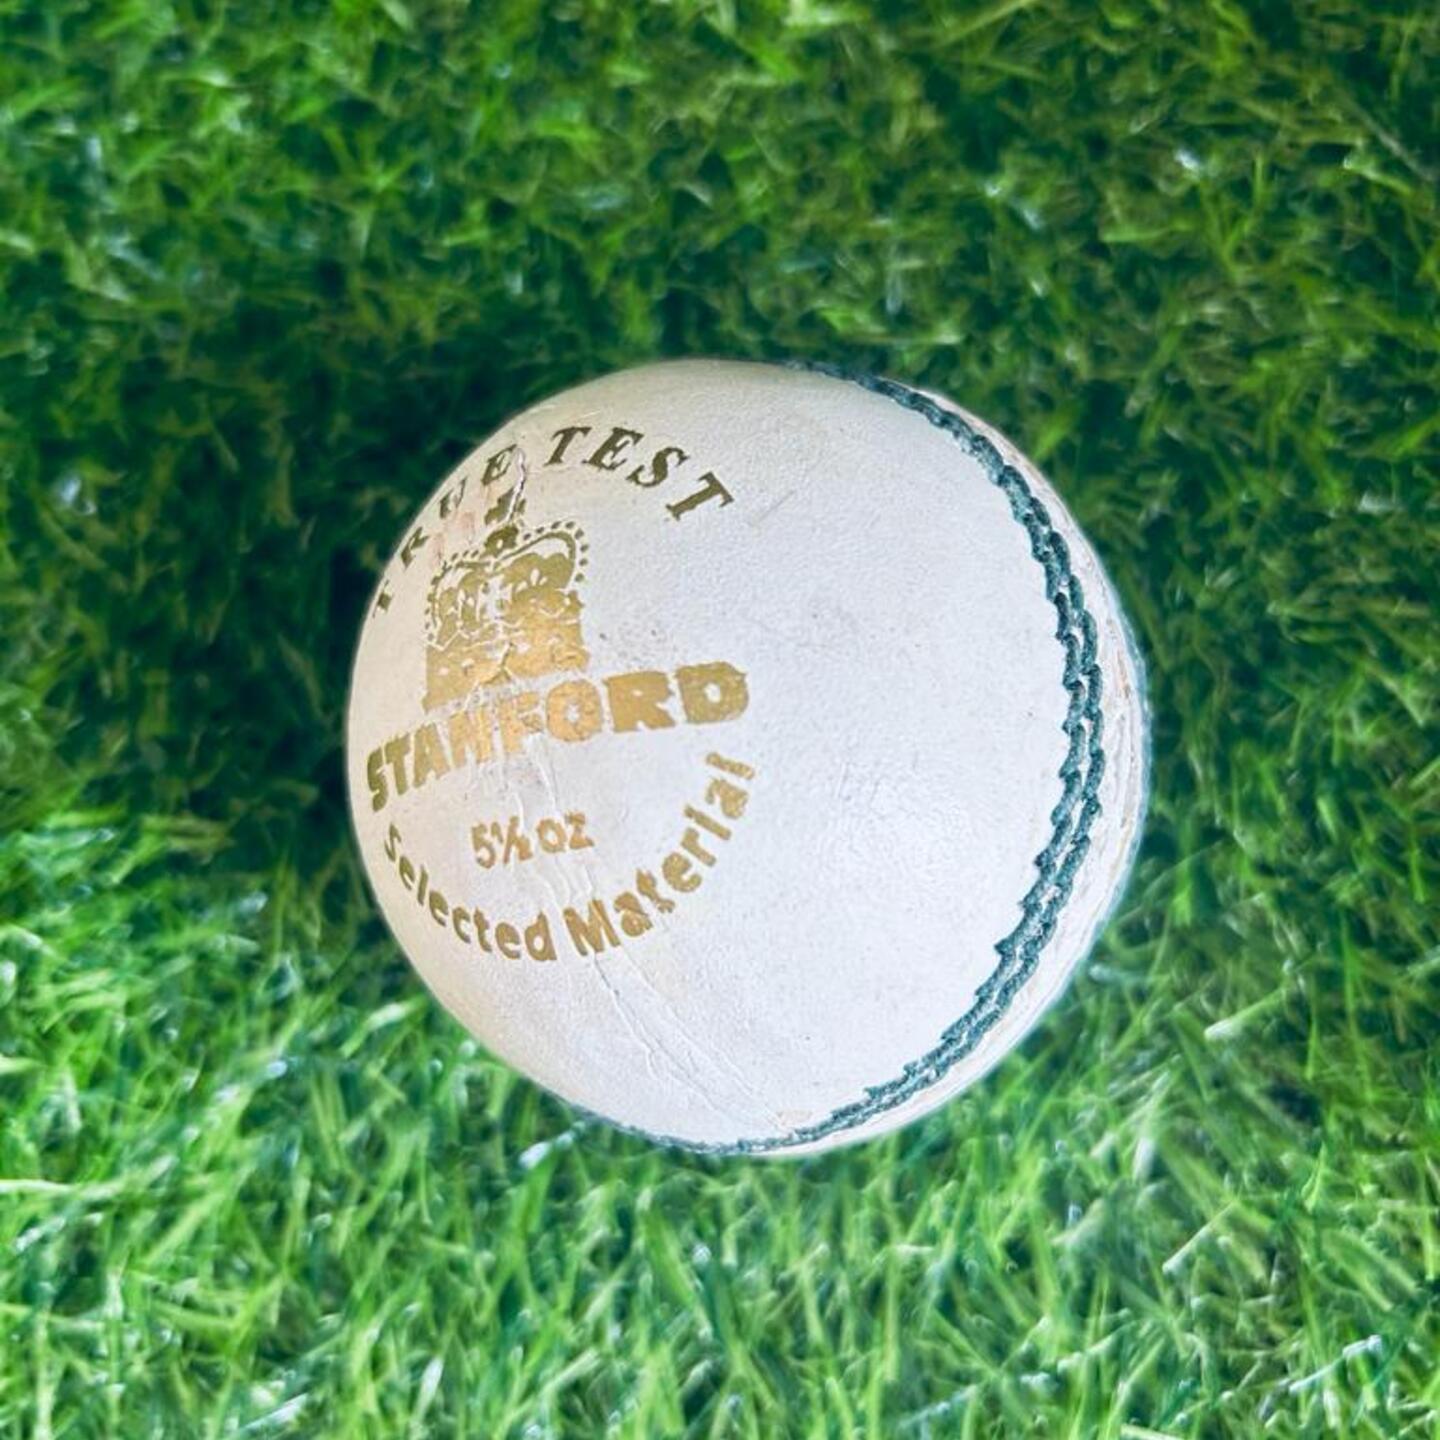 SF TRUE TEST LEATHER CRICKET BALL 4 PC.